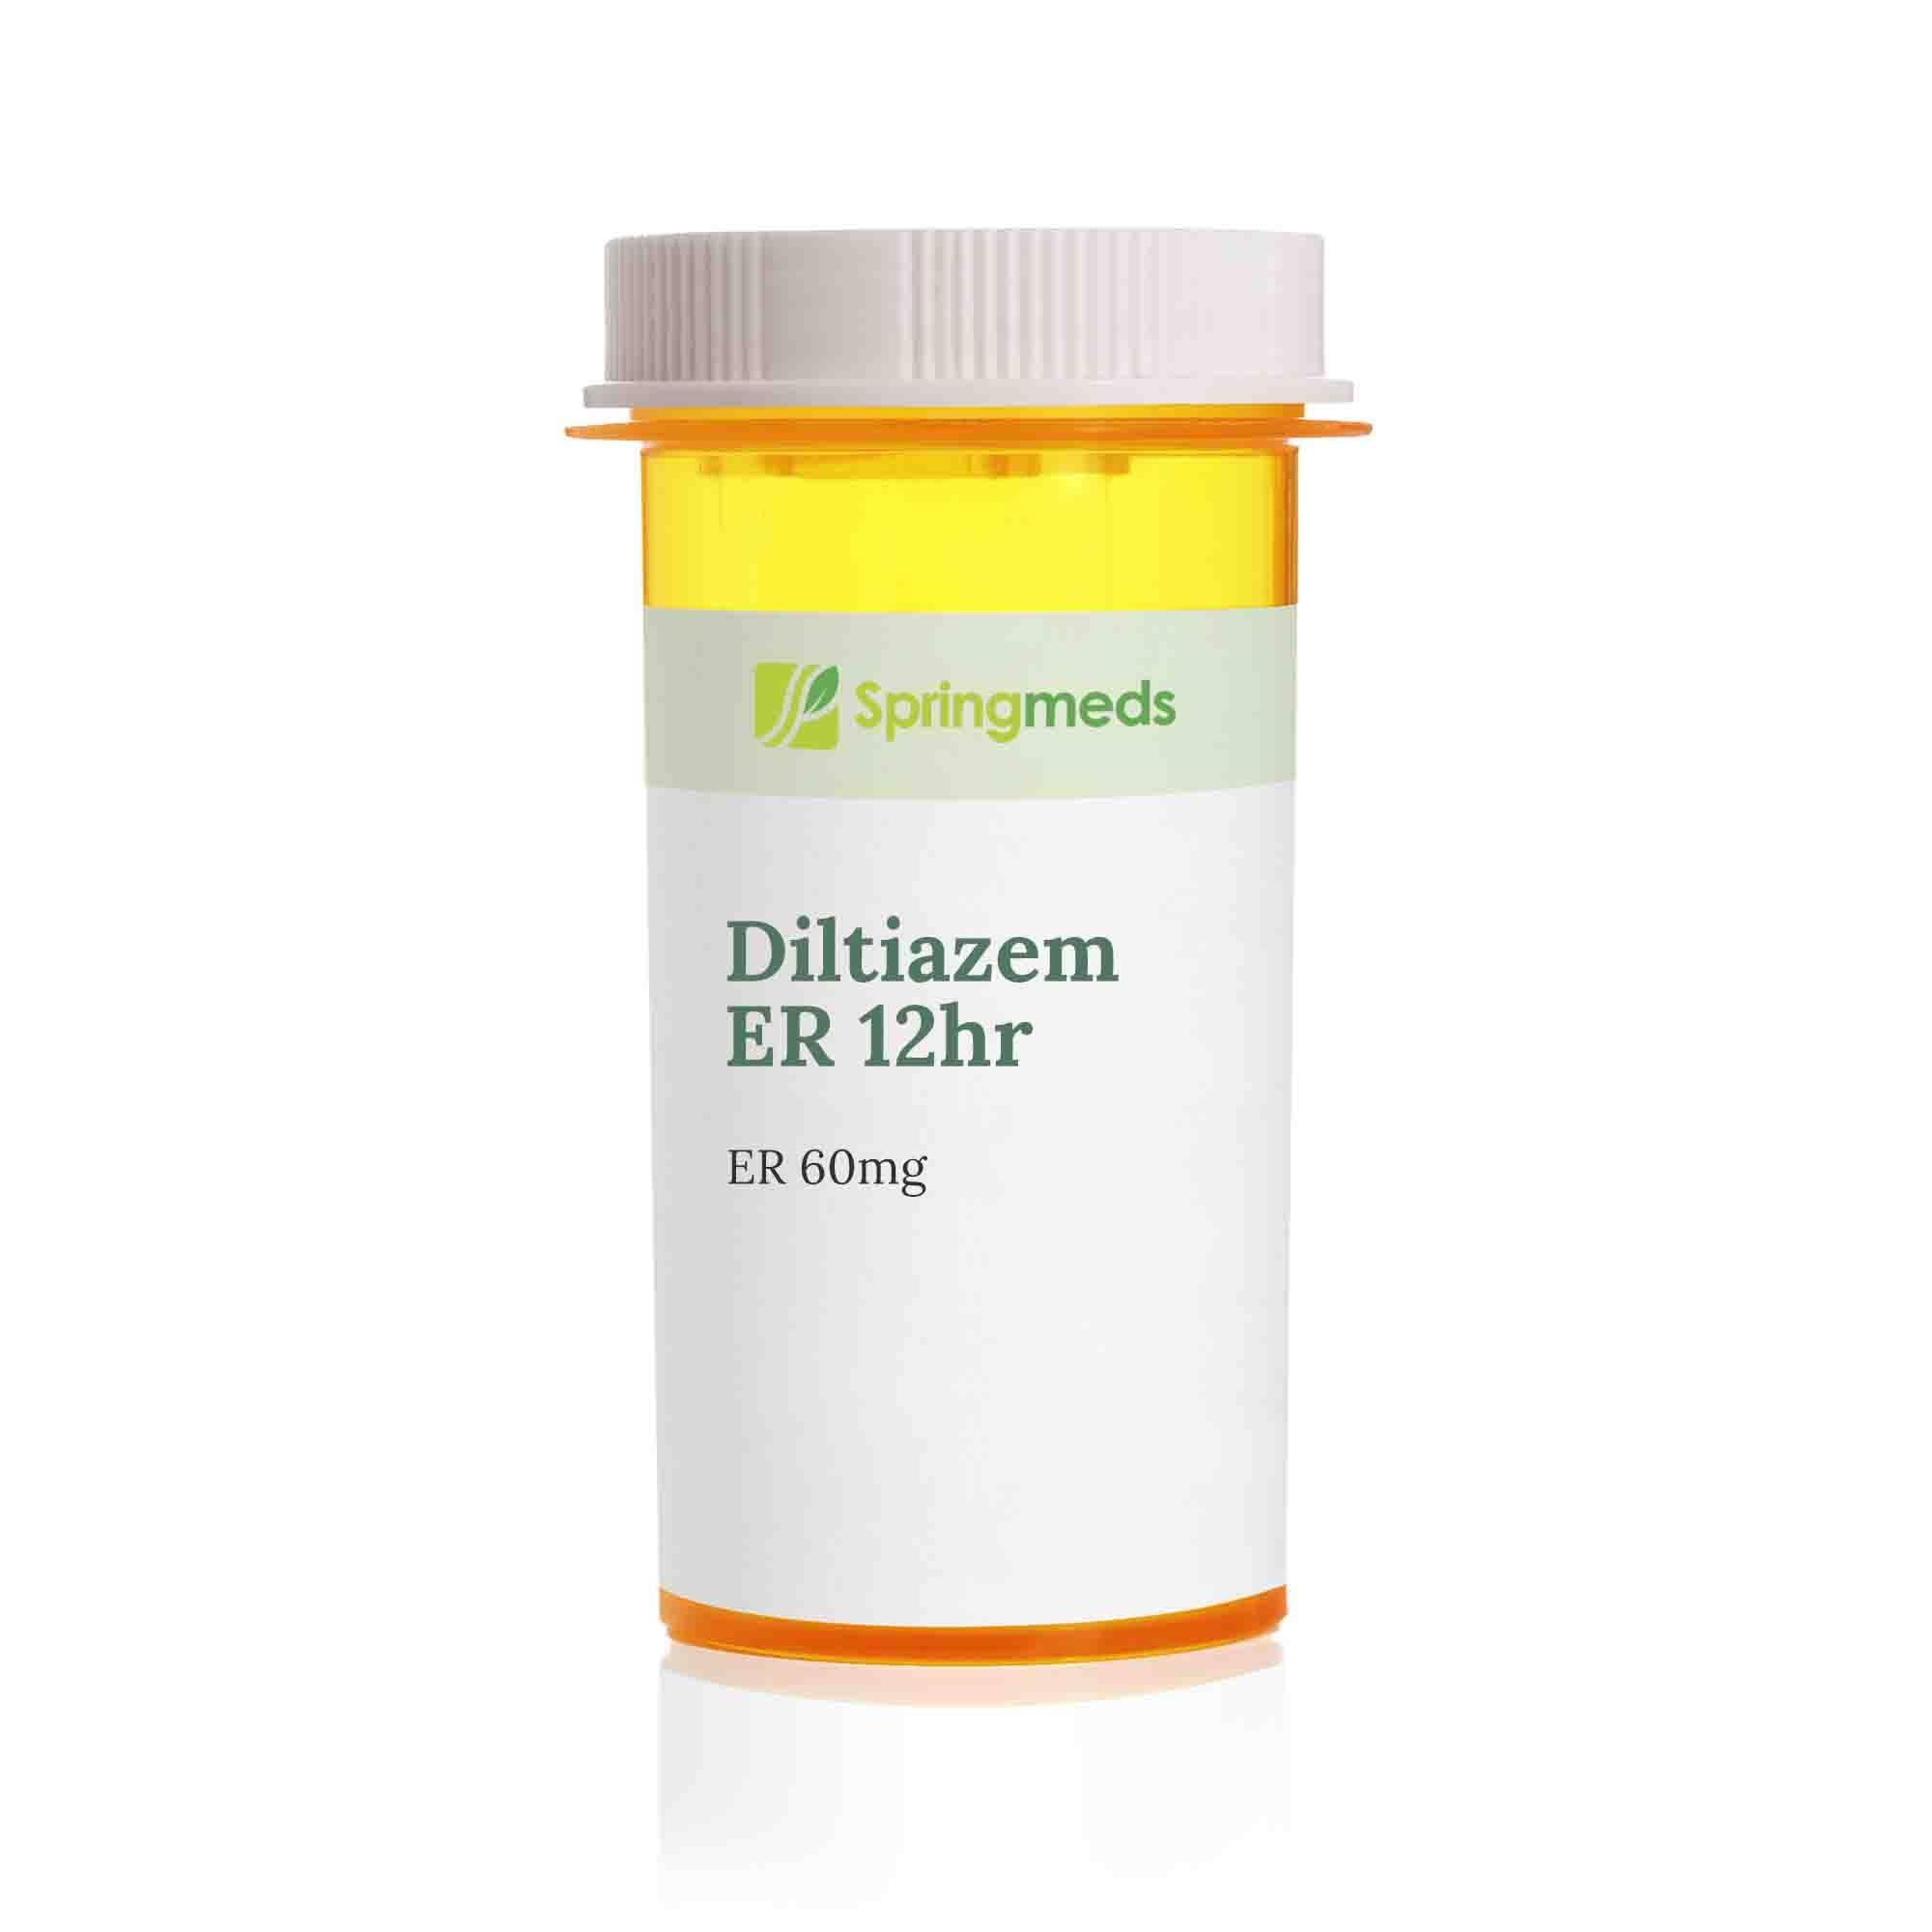 Diltiazem HCL SR (Twice-a-Day) SR Extended Release Capsule (generic Cardizem SR) 60mg - 30 Capsules